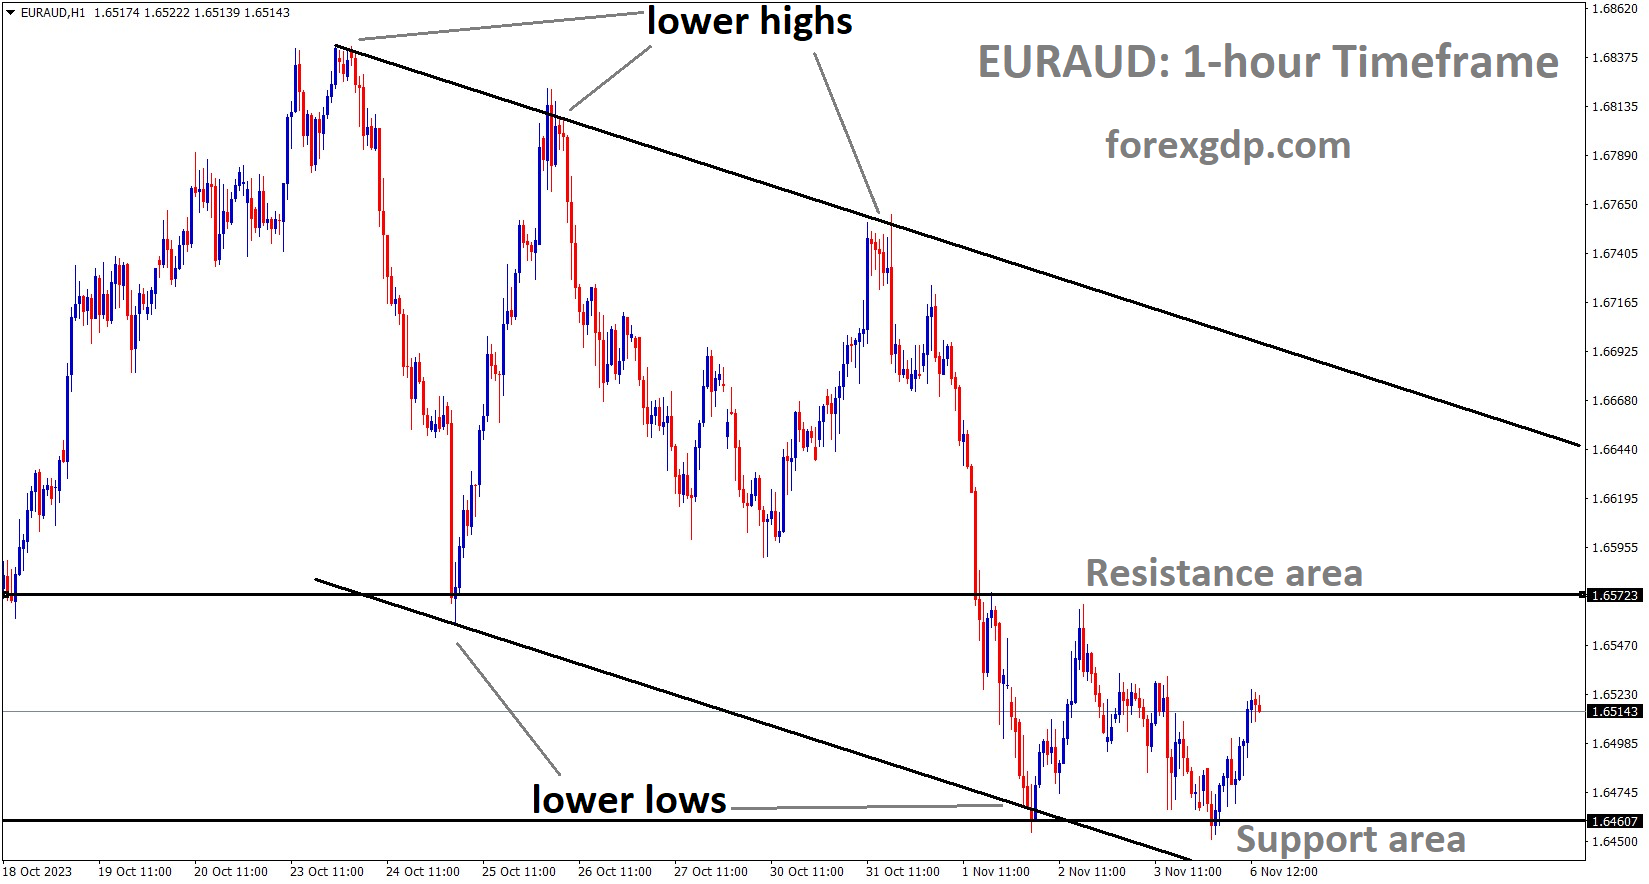 EURAUD is moving in the Descending channel